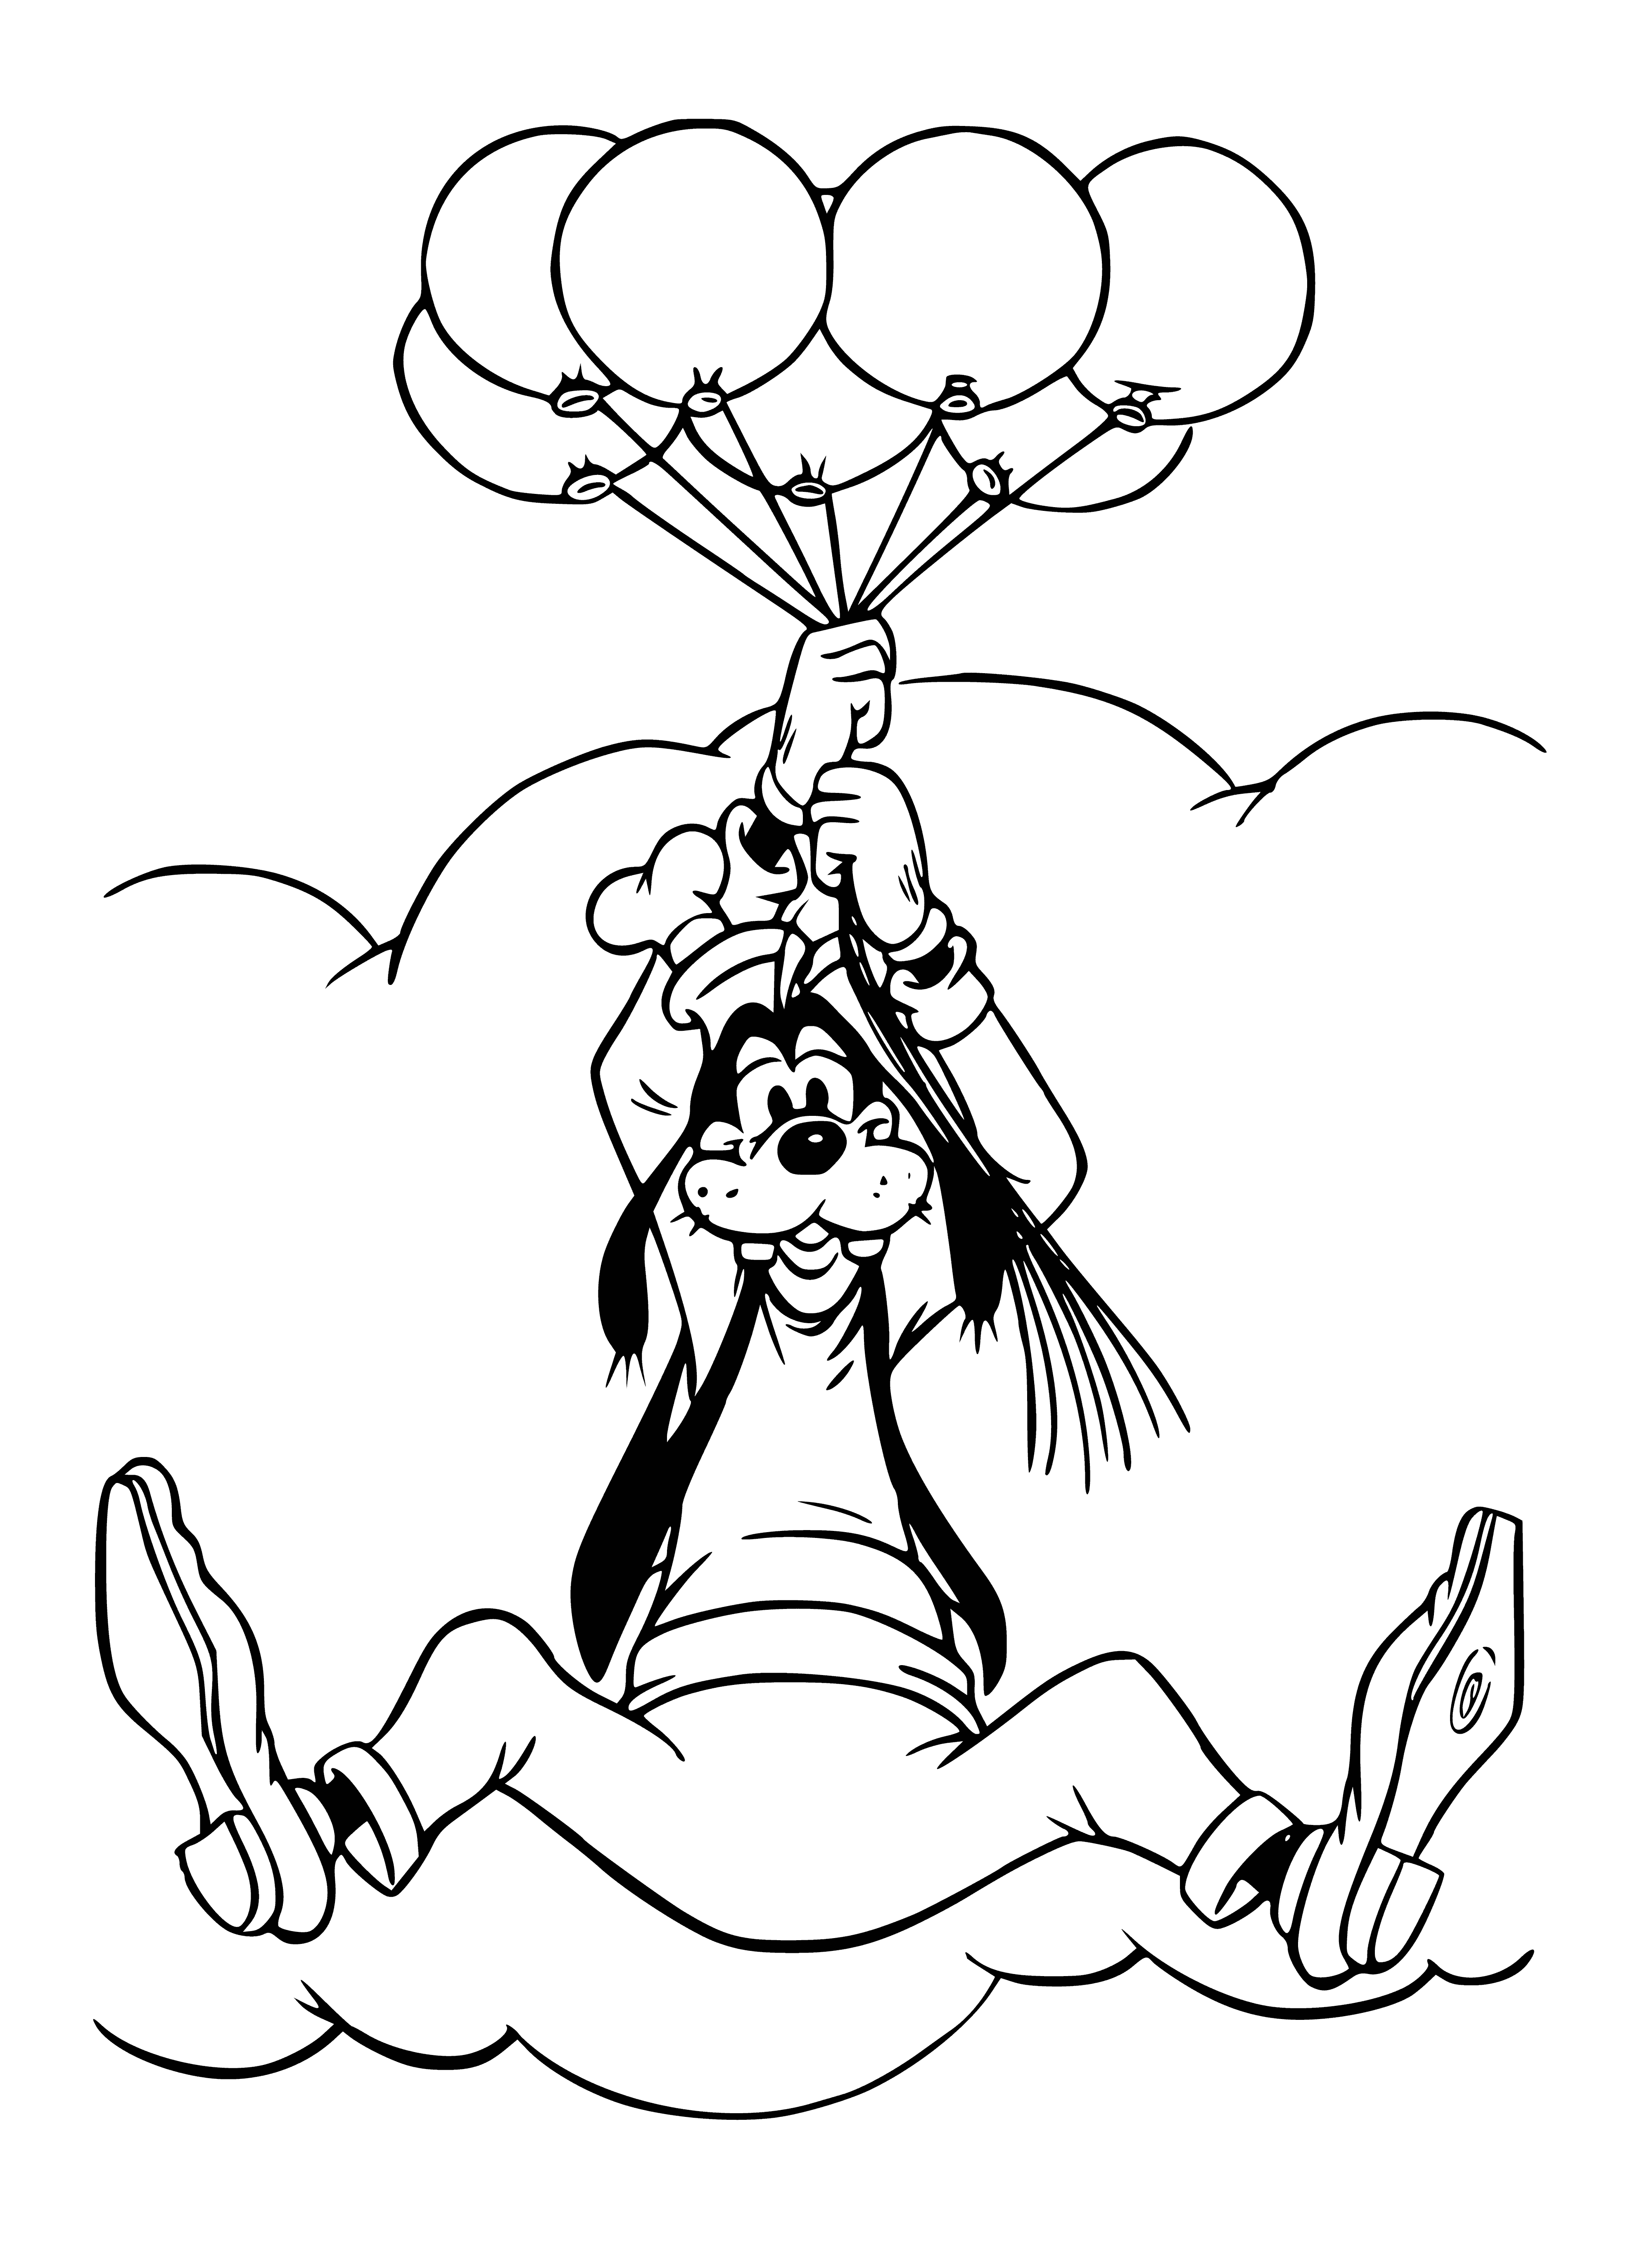 On balls coloring page